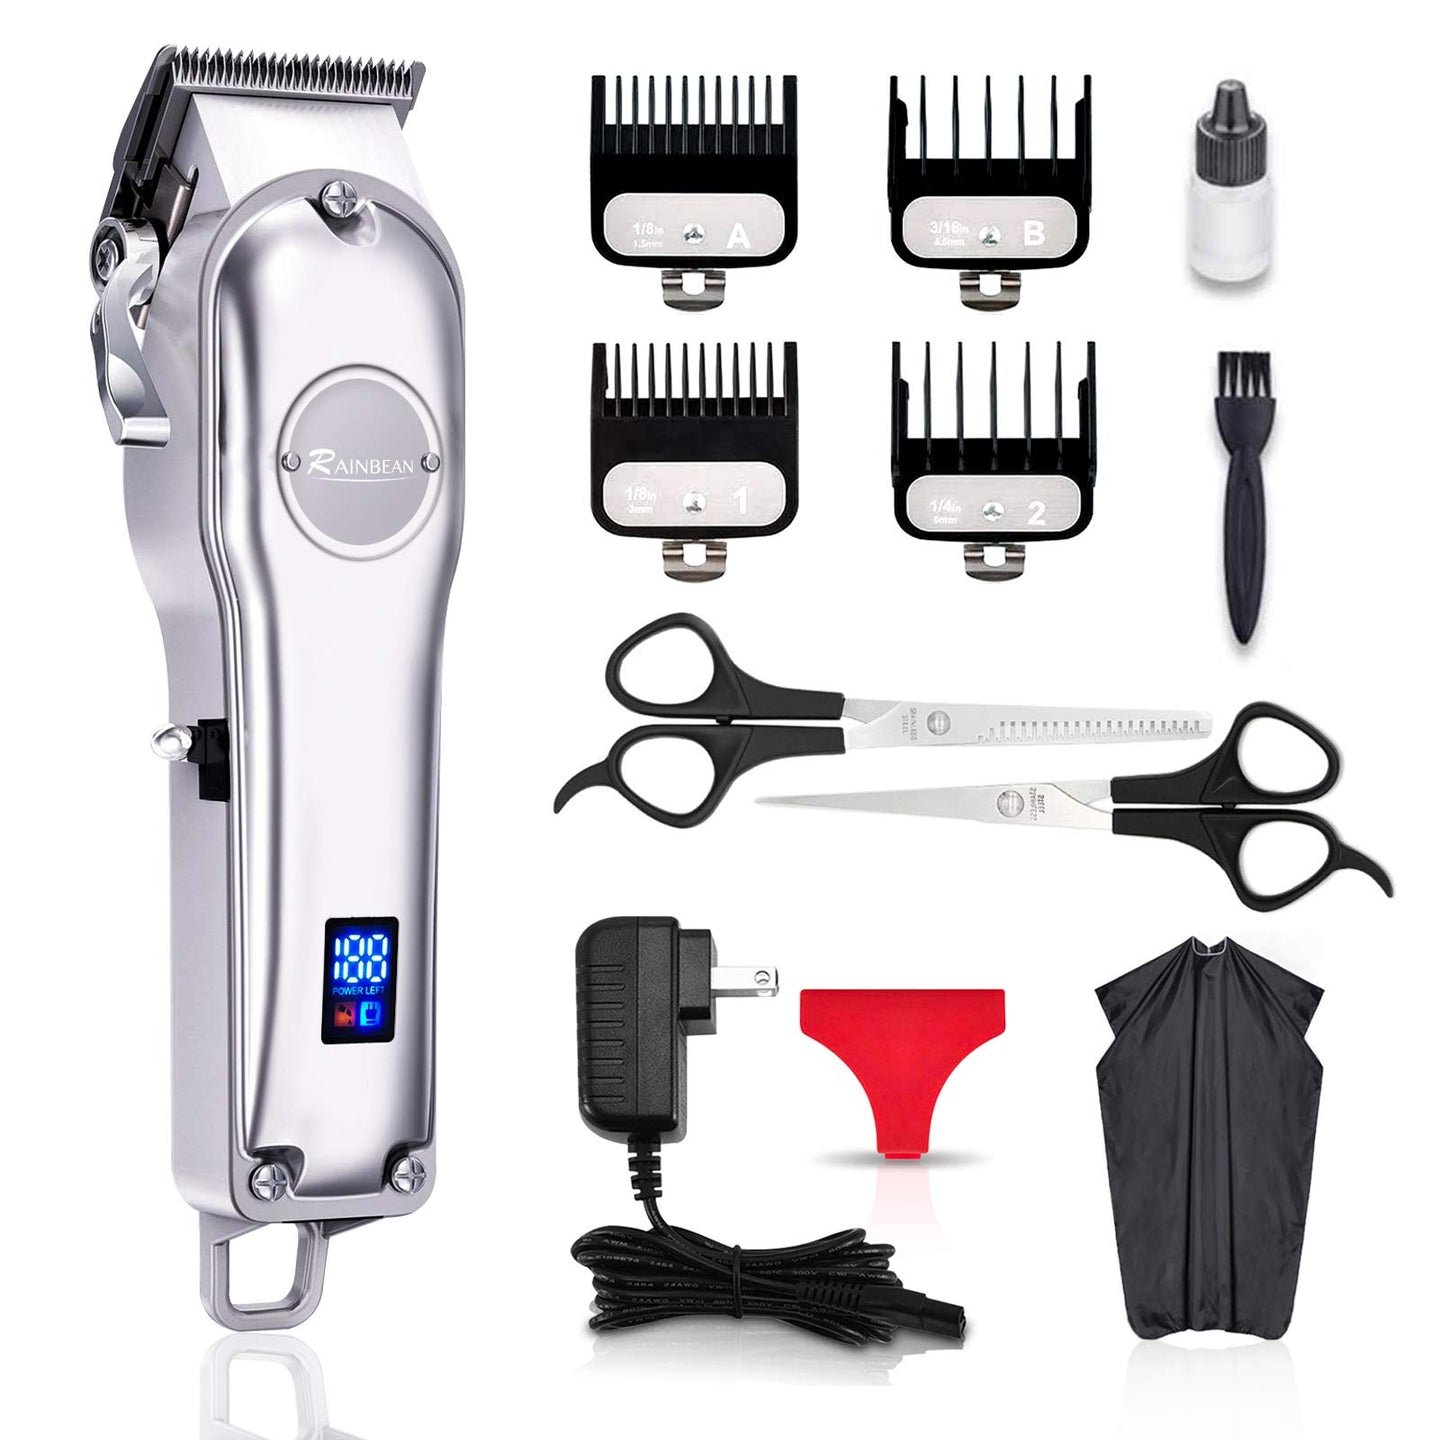 Men Hair Trimmer 3 in 1 IPX7 Waterproof Beard Trimmer Grooming Kit Cordless Hair Clipper for Women & Children LED Display USB Rechargeable Amazon Banned